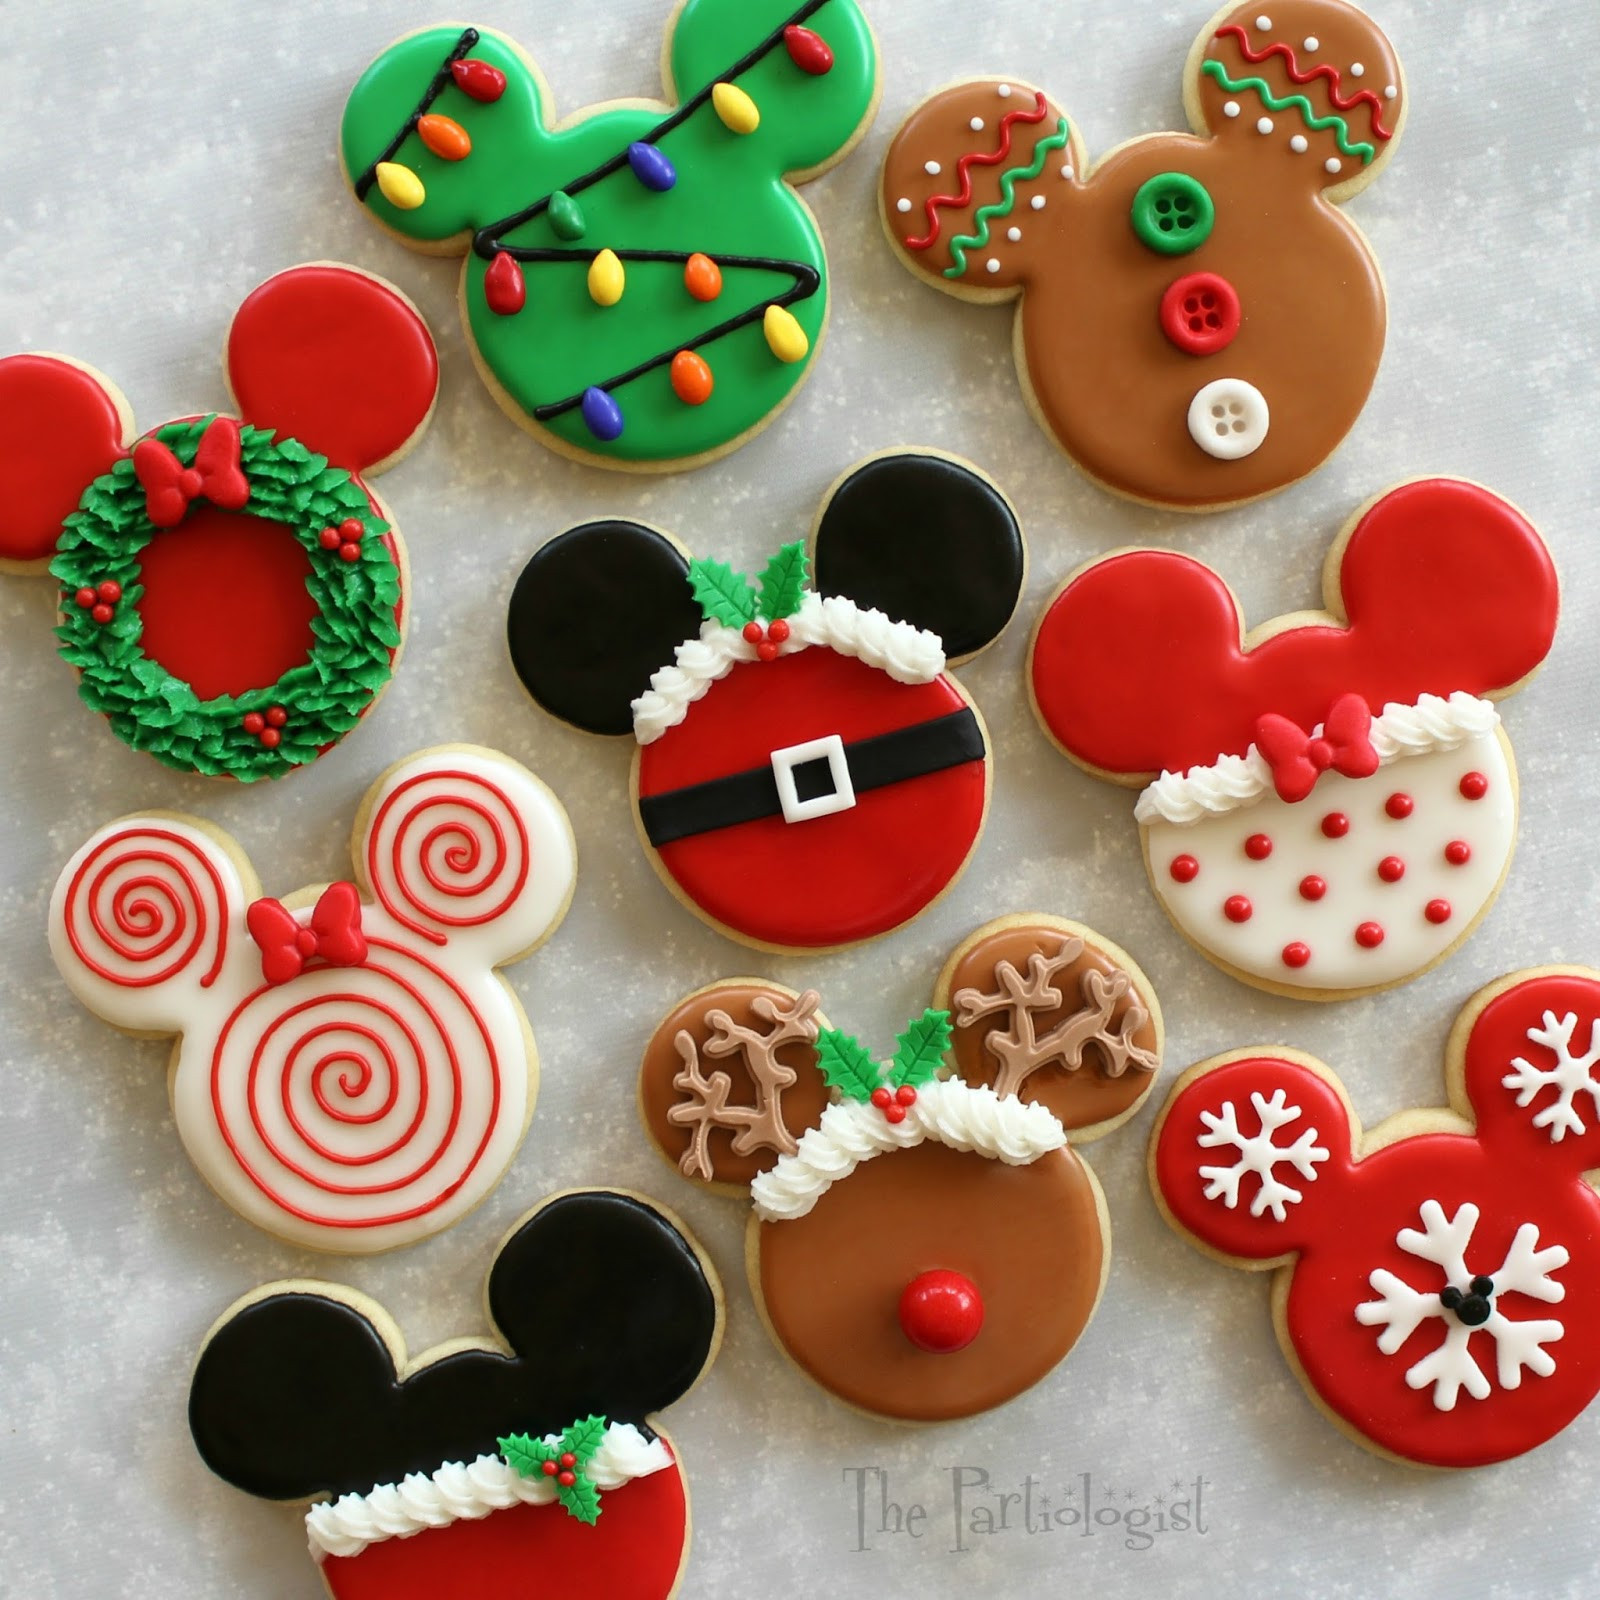 Christmas Themed Cookies
 The Partiologist Disney Themed Christmas Cookies